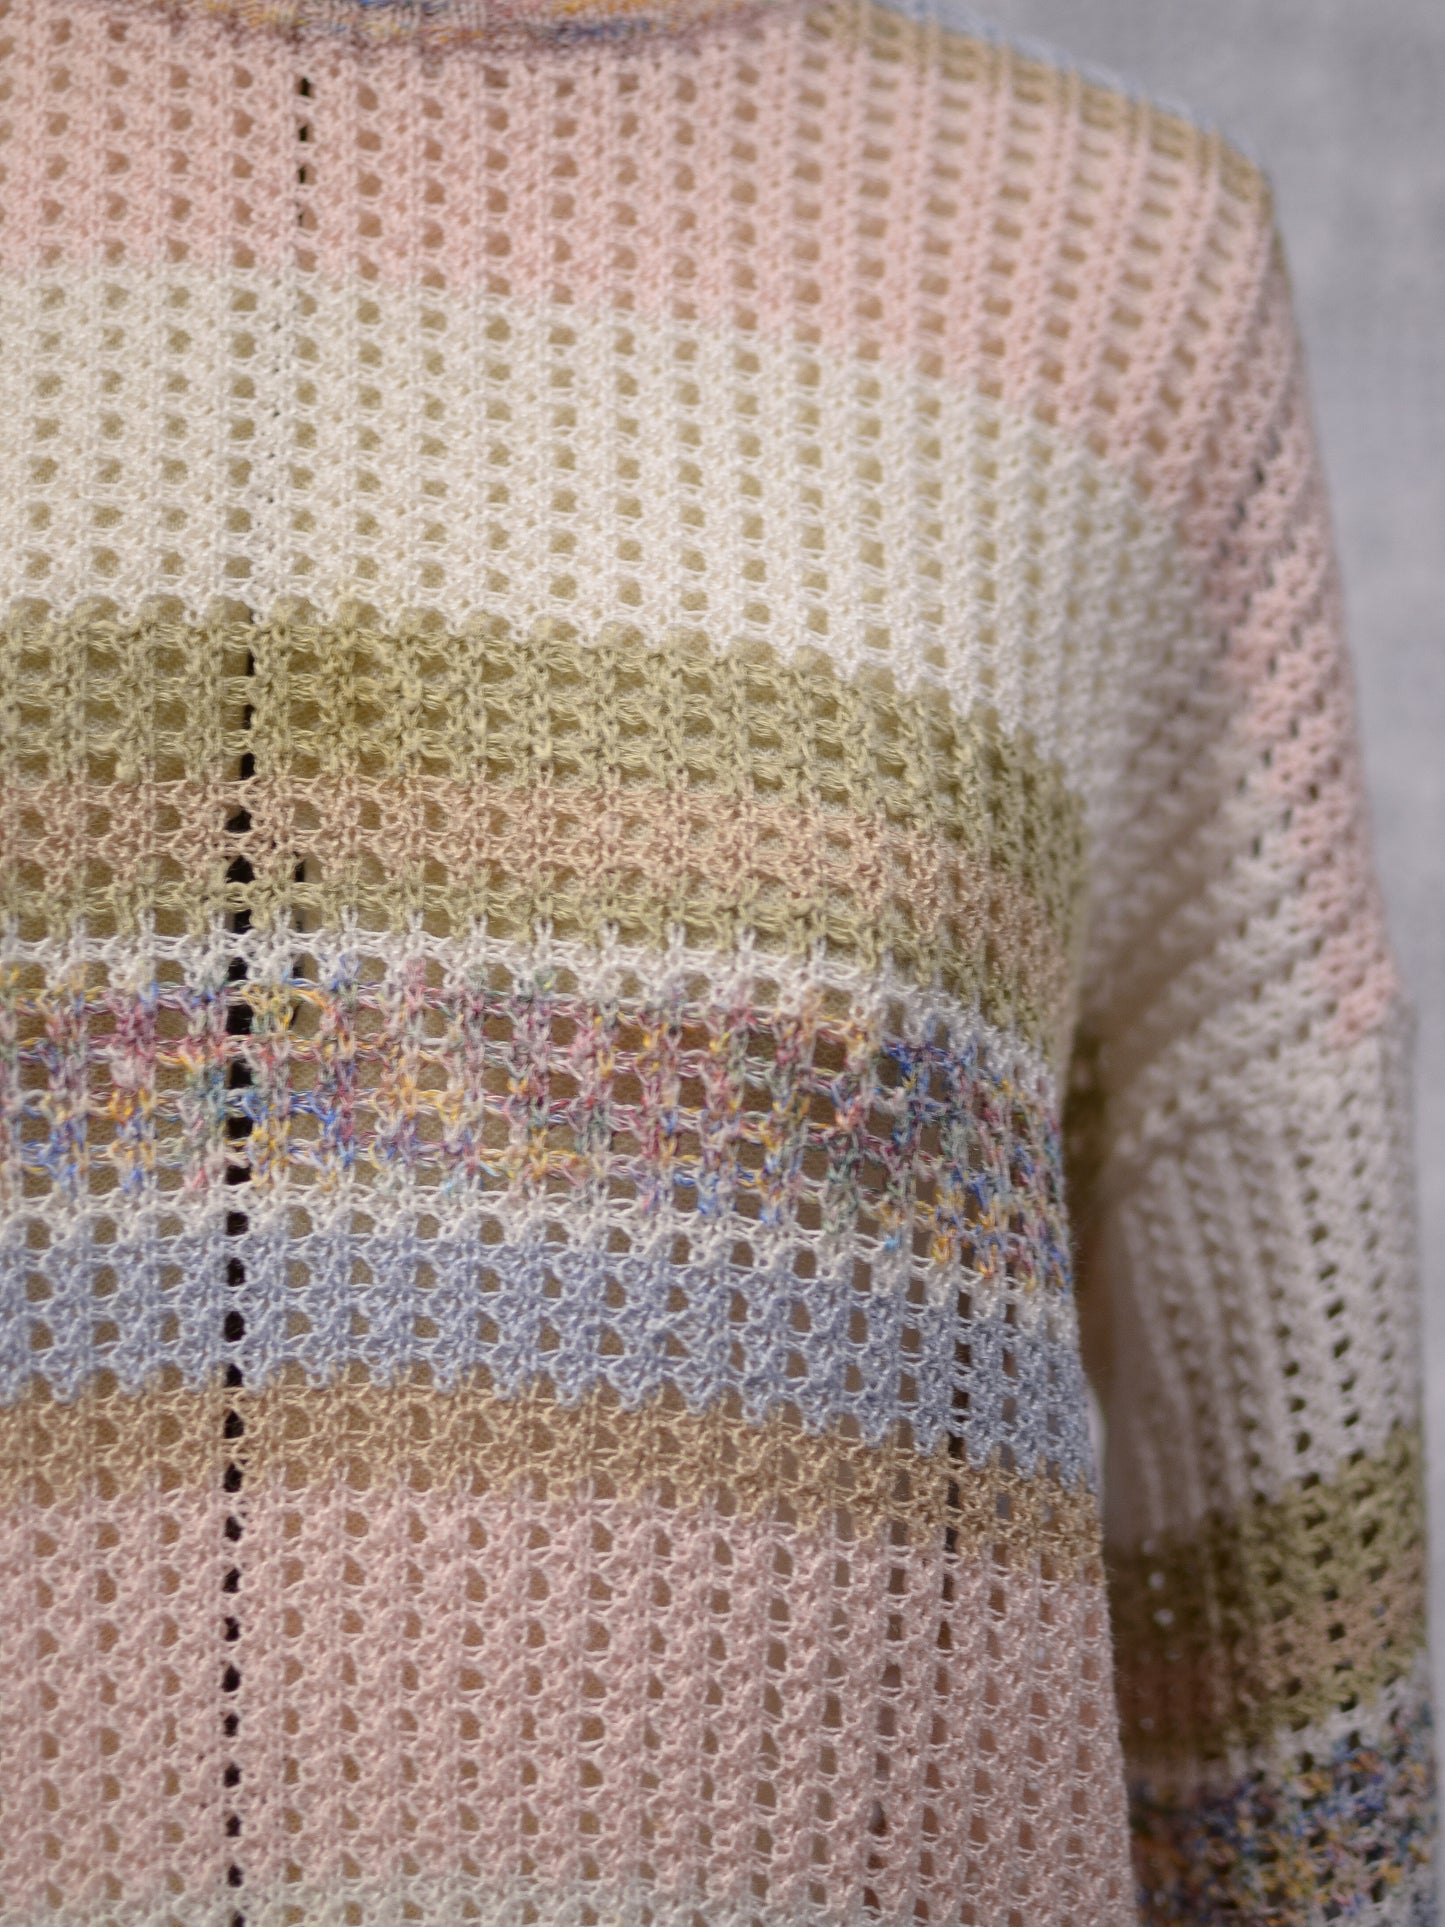 1980s Next pink, blue, white and brown striped knit cotton jumper